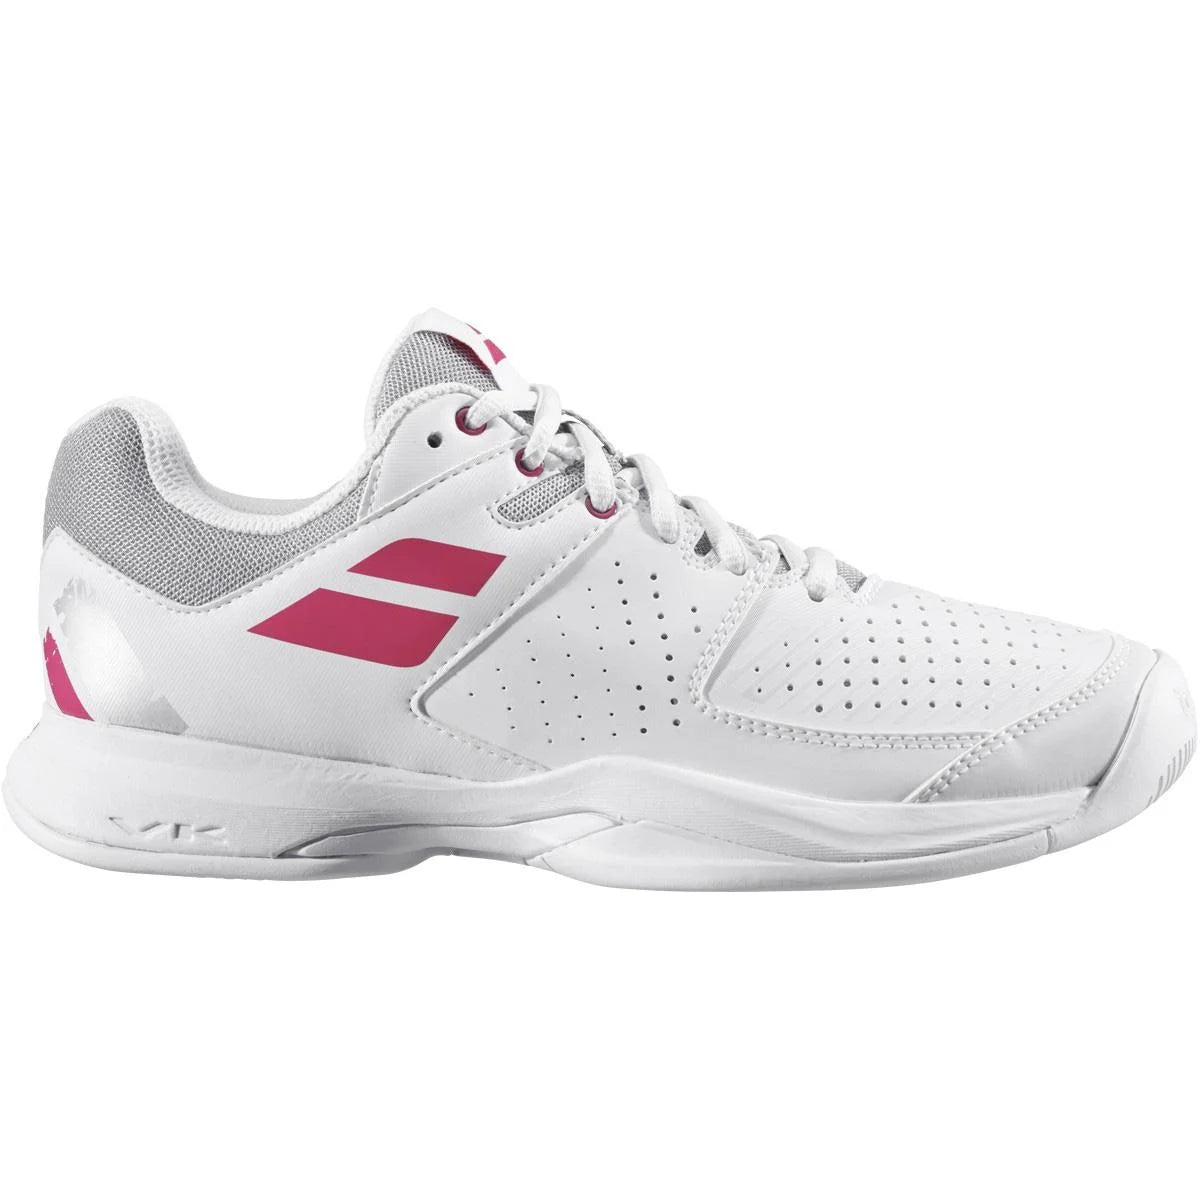 Babolat Pulsion All Court Womens Tennis Shoes - White/White